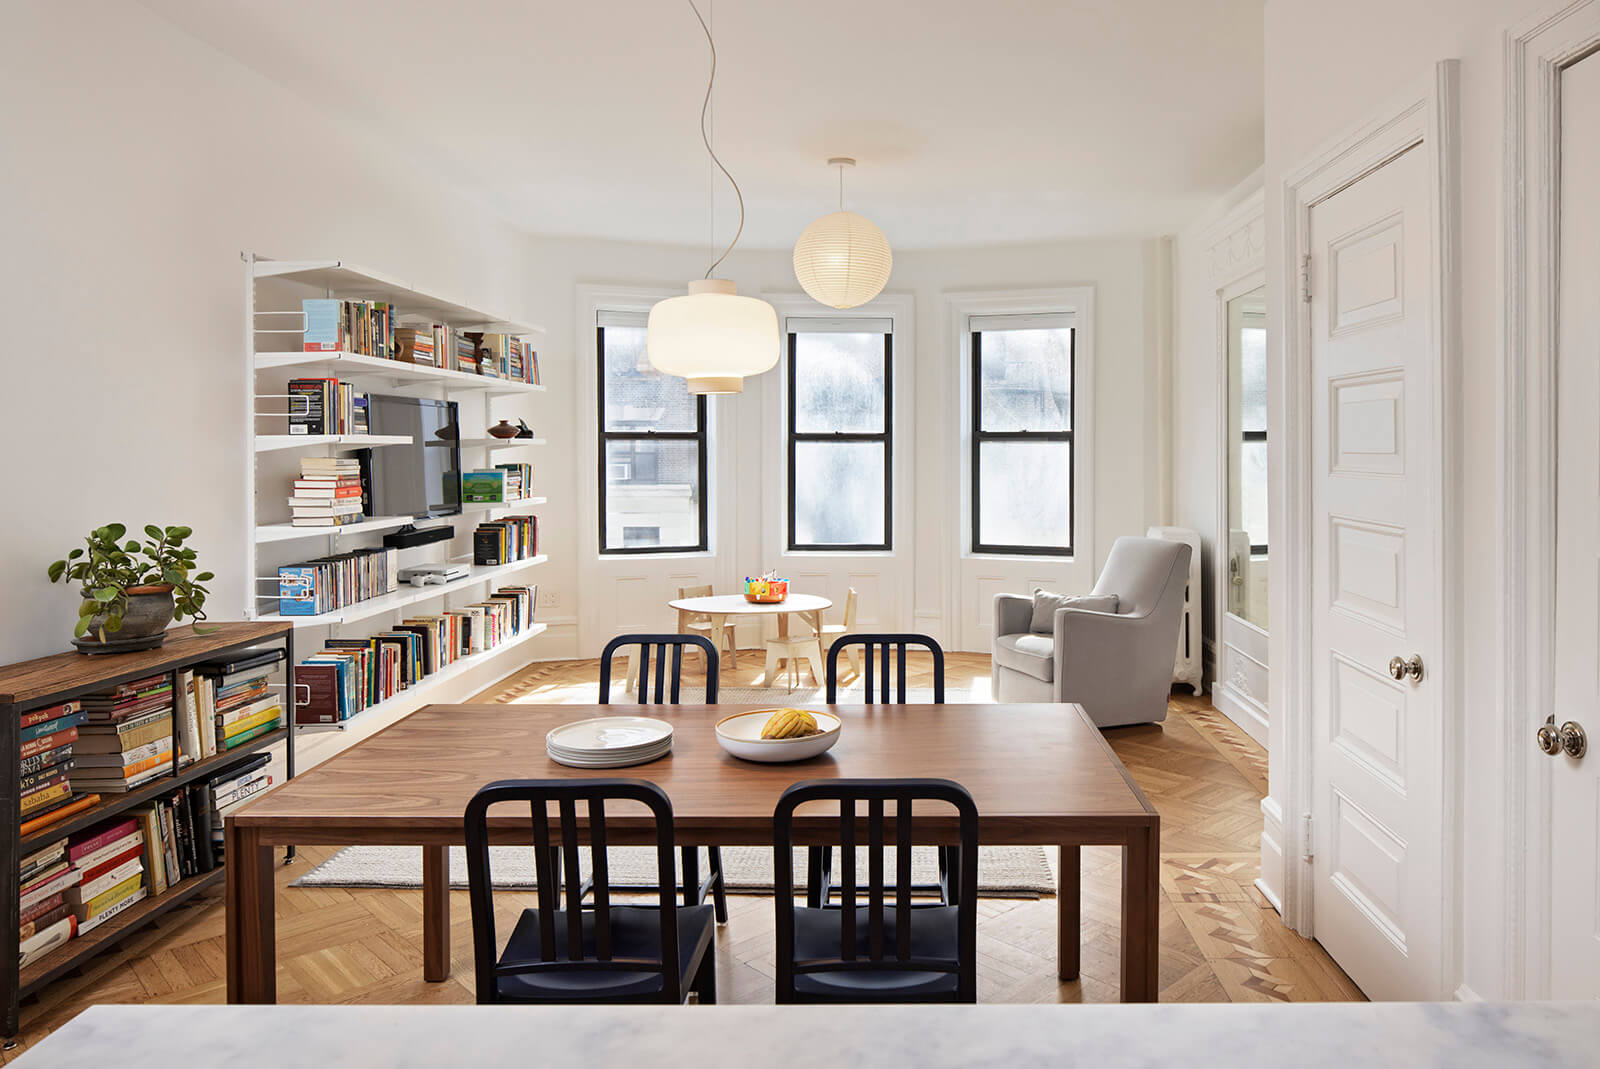 Reimagined Layout Improves Flow of Long Park Slope Prewar for Young Family